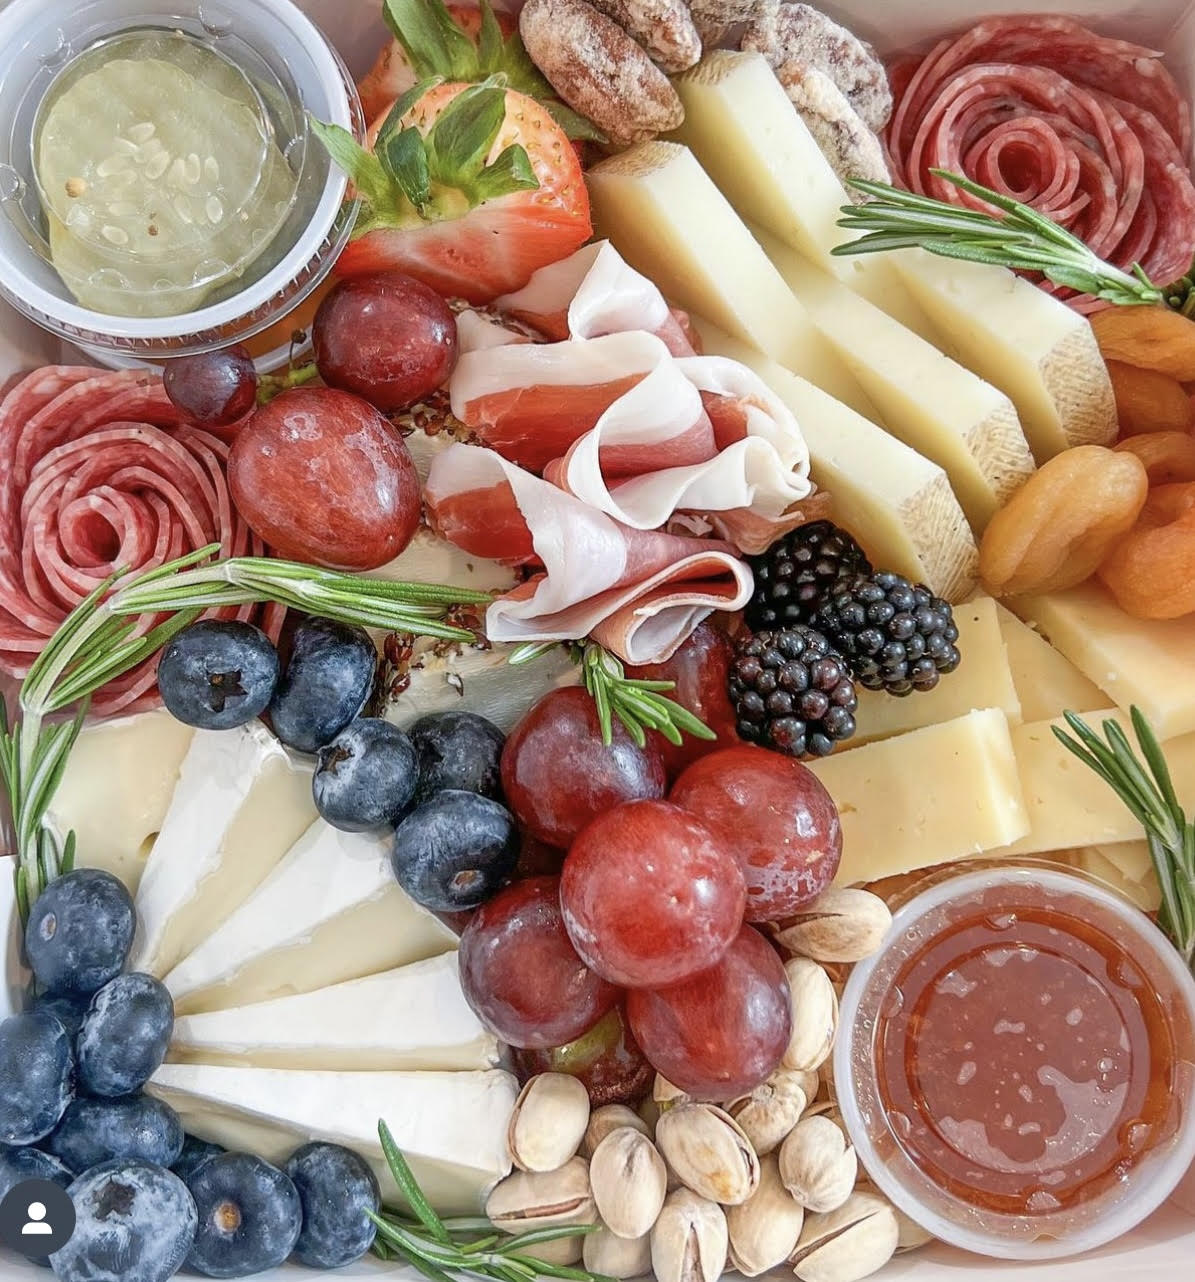 Charcuterie and Candle Workshop! 12.16.23 @ 1:00pm - White Street Market